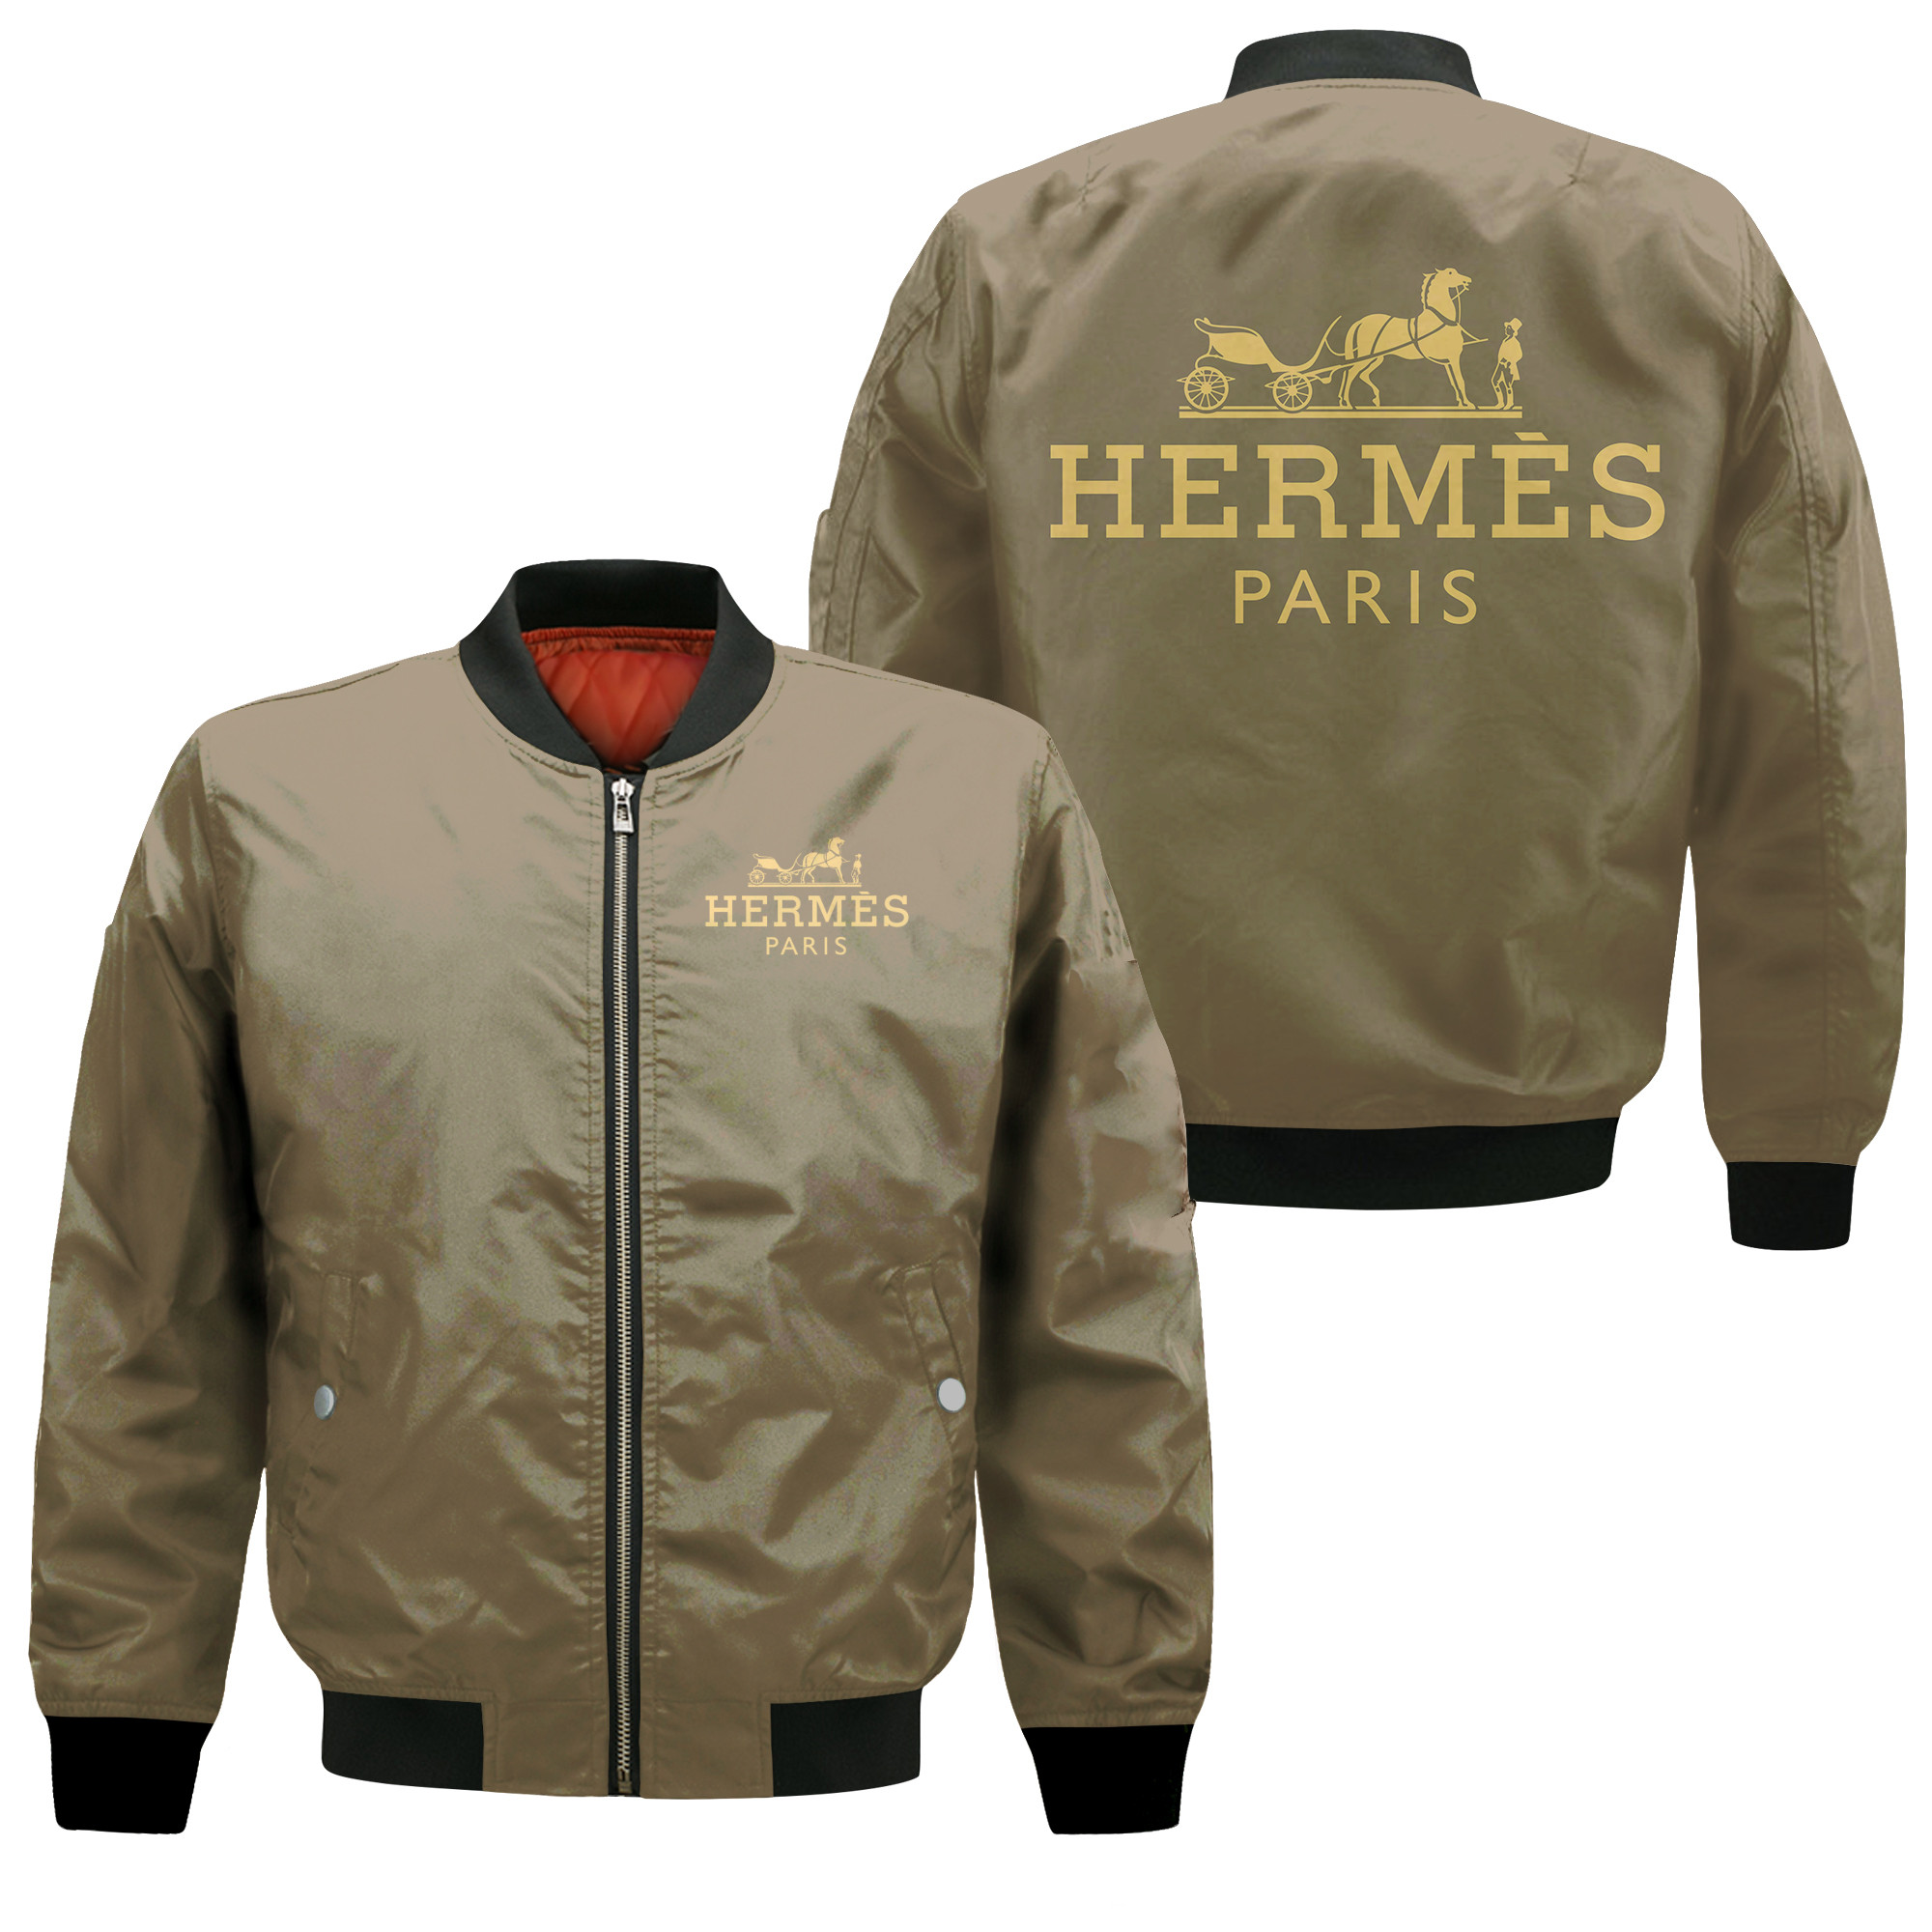 Get yourself an anime bomber jacket! 226